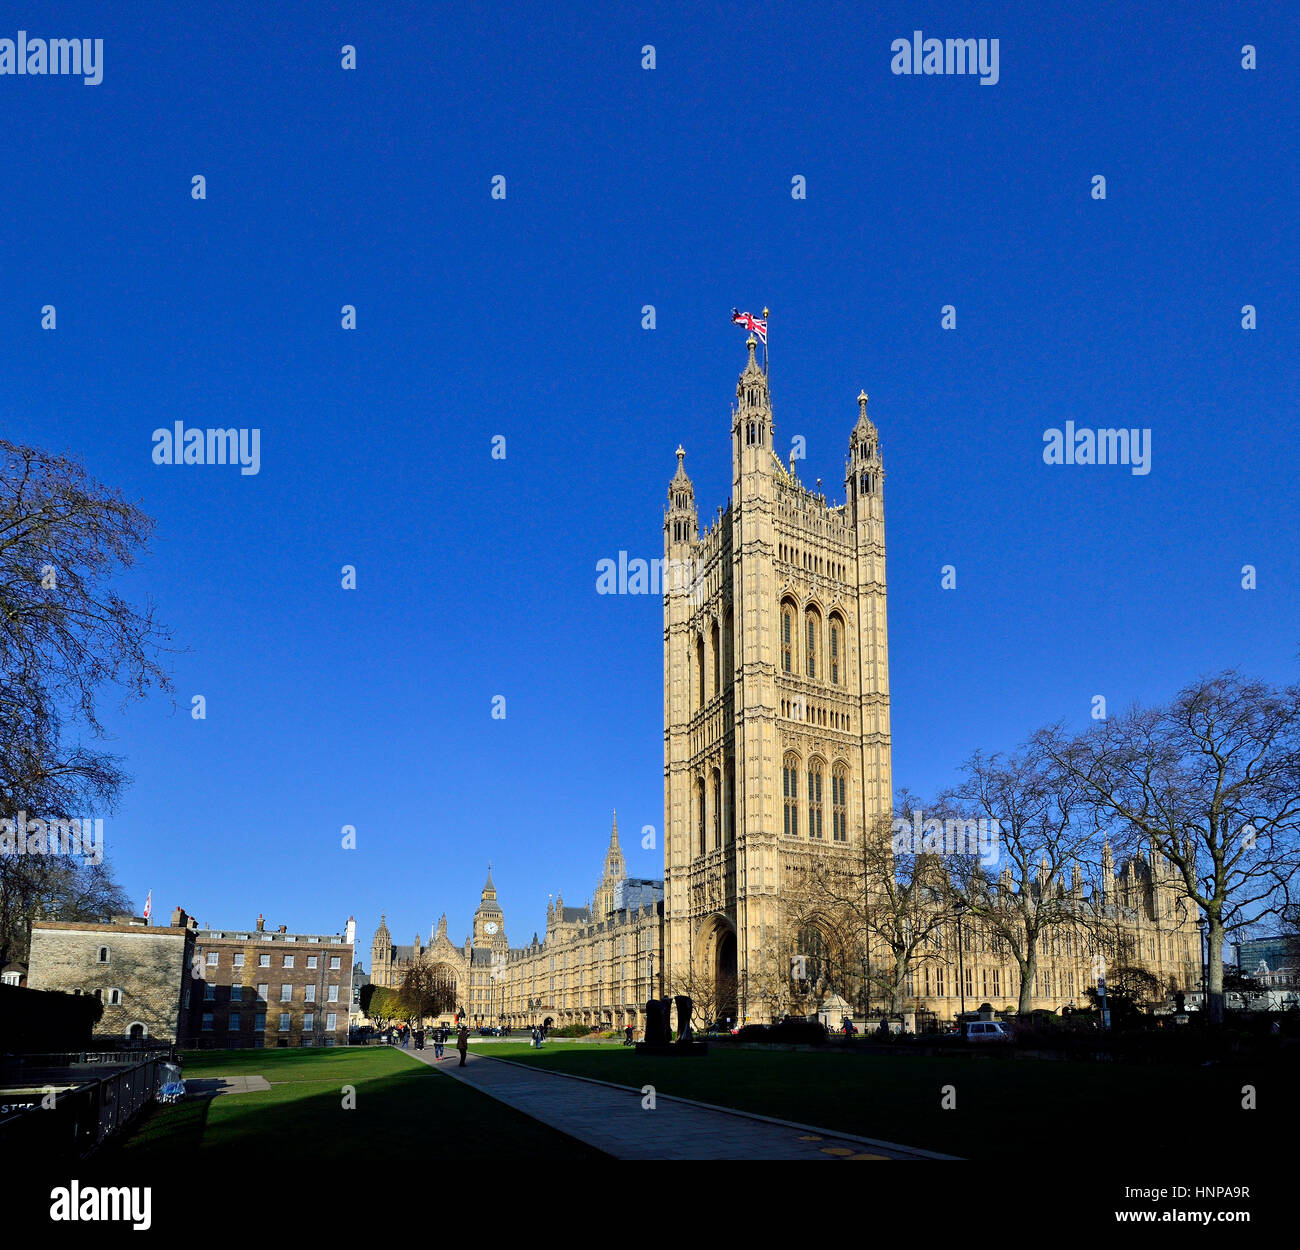 London, England, UK. Houses of Parliament (Victoria Tower) seen from College Green Stock Photo